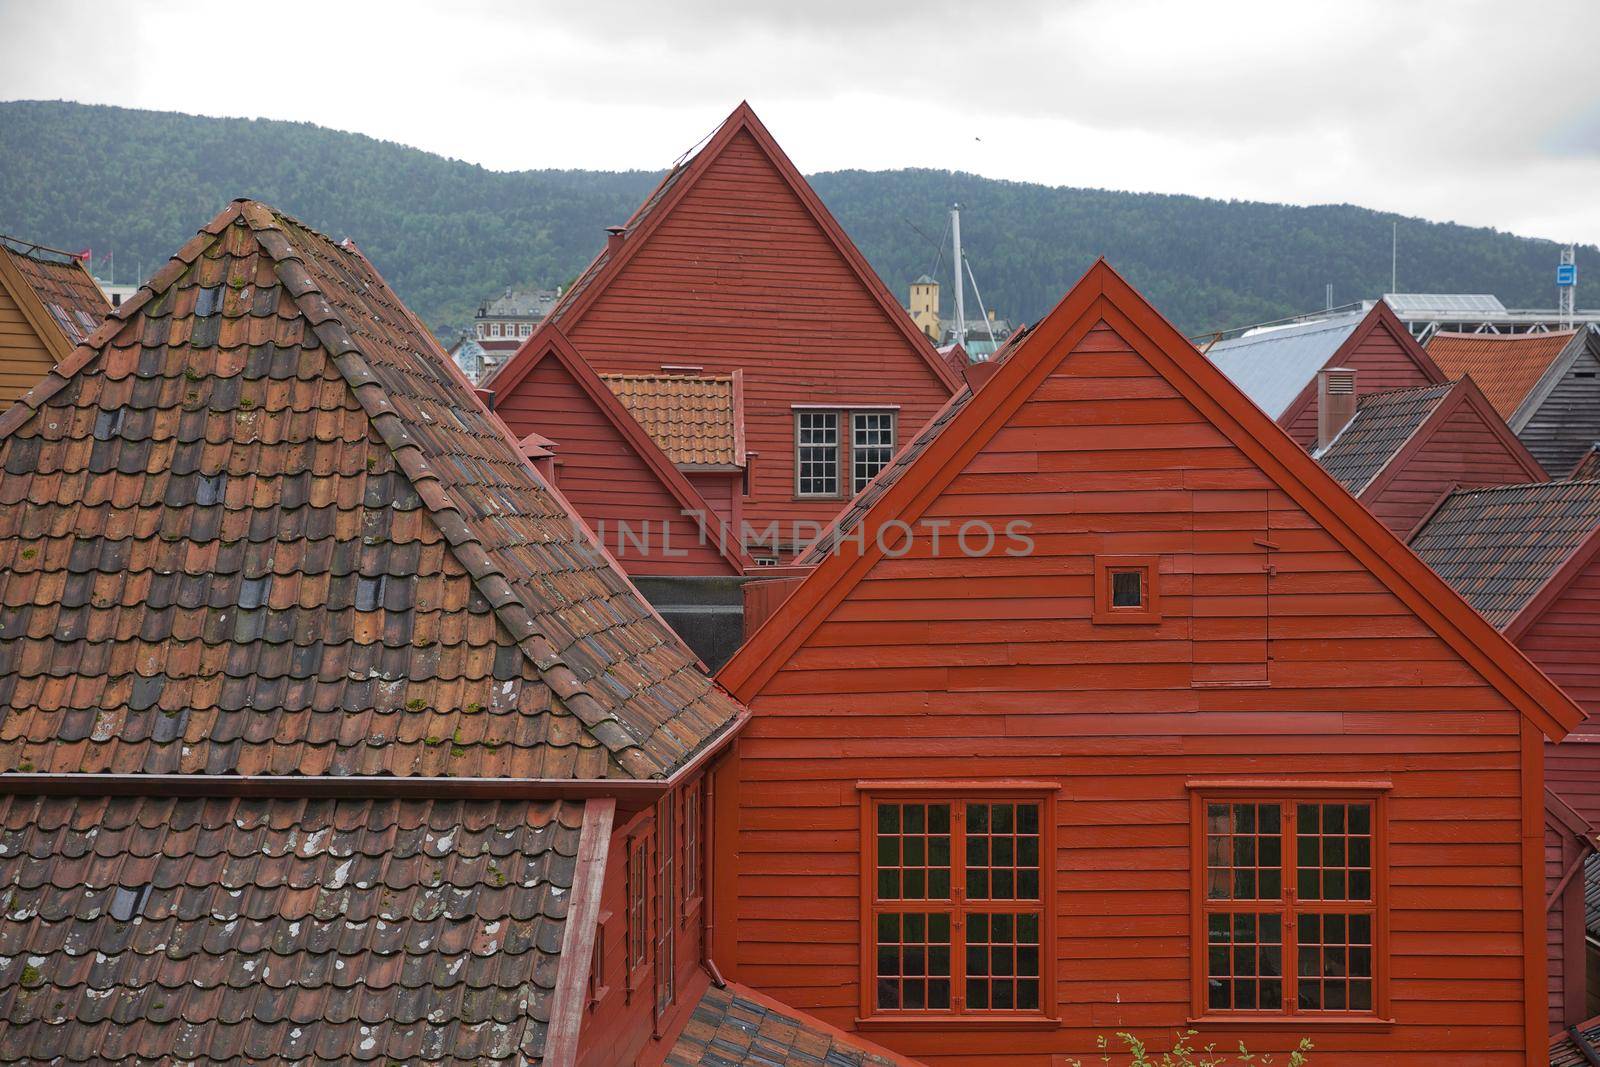 Old vintage houses and classic architecture of Bryggen in town of Bergen in Norway.